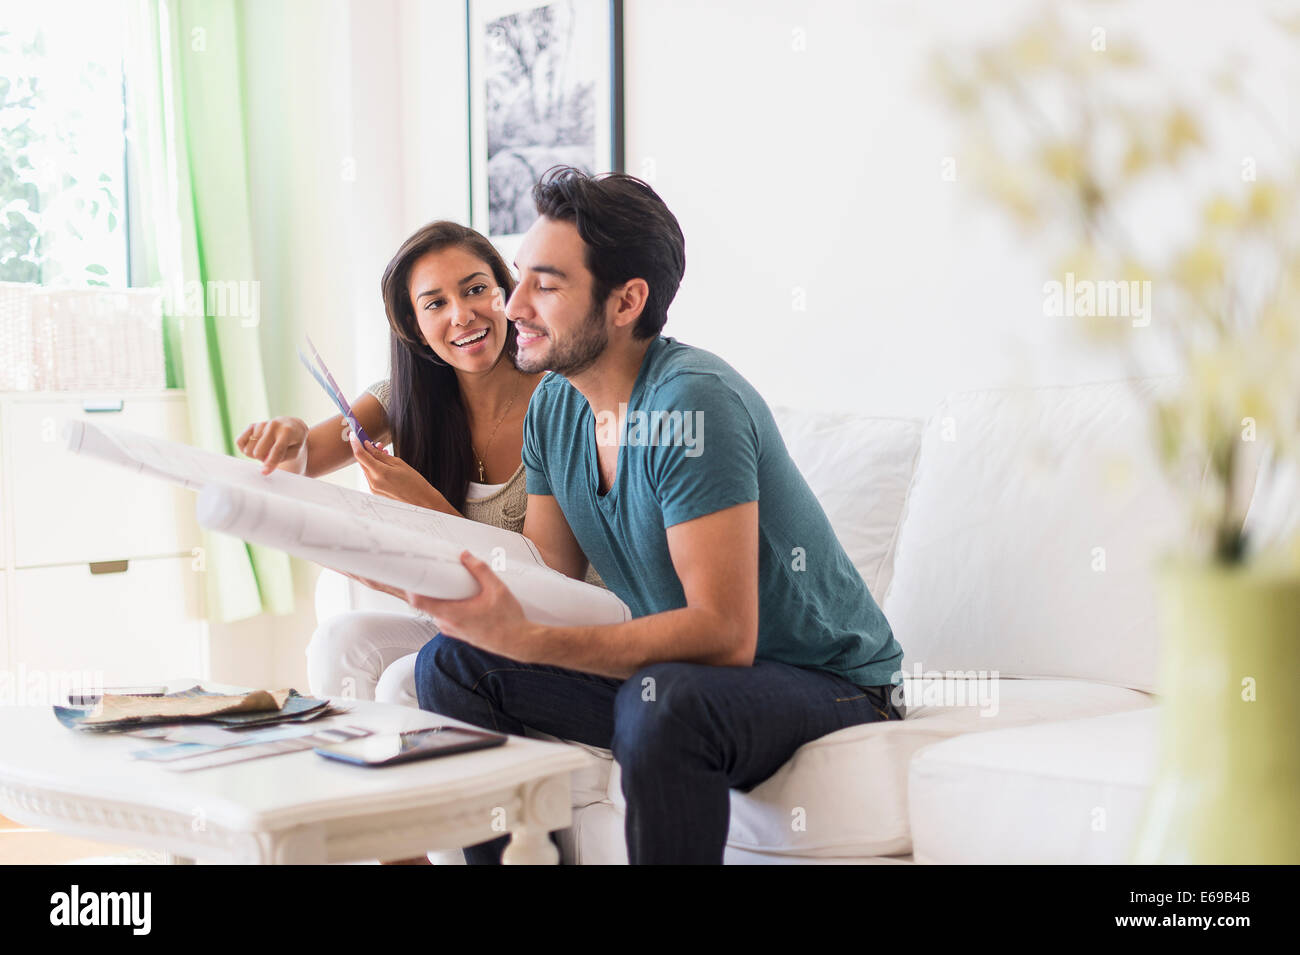 Couple examining blueprints in living room Banque D'Images